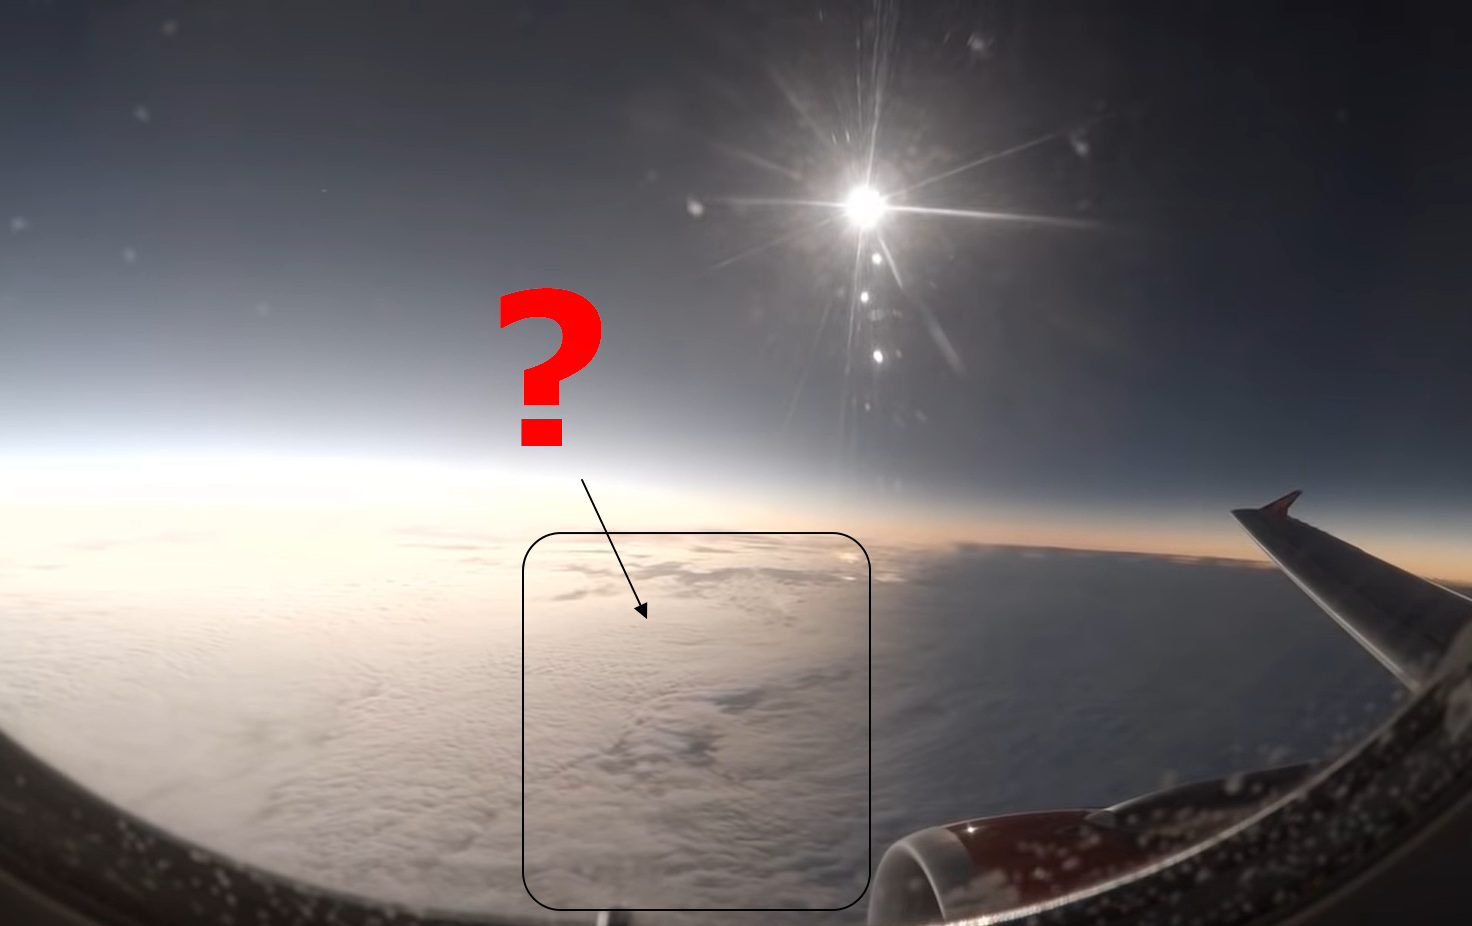 Possibility of watching shadow bands from the plane